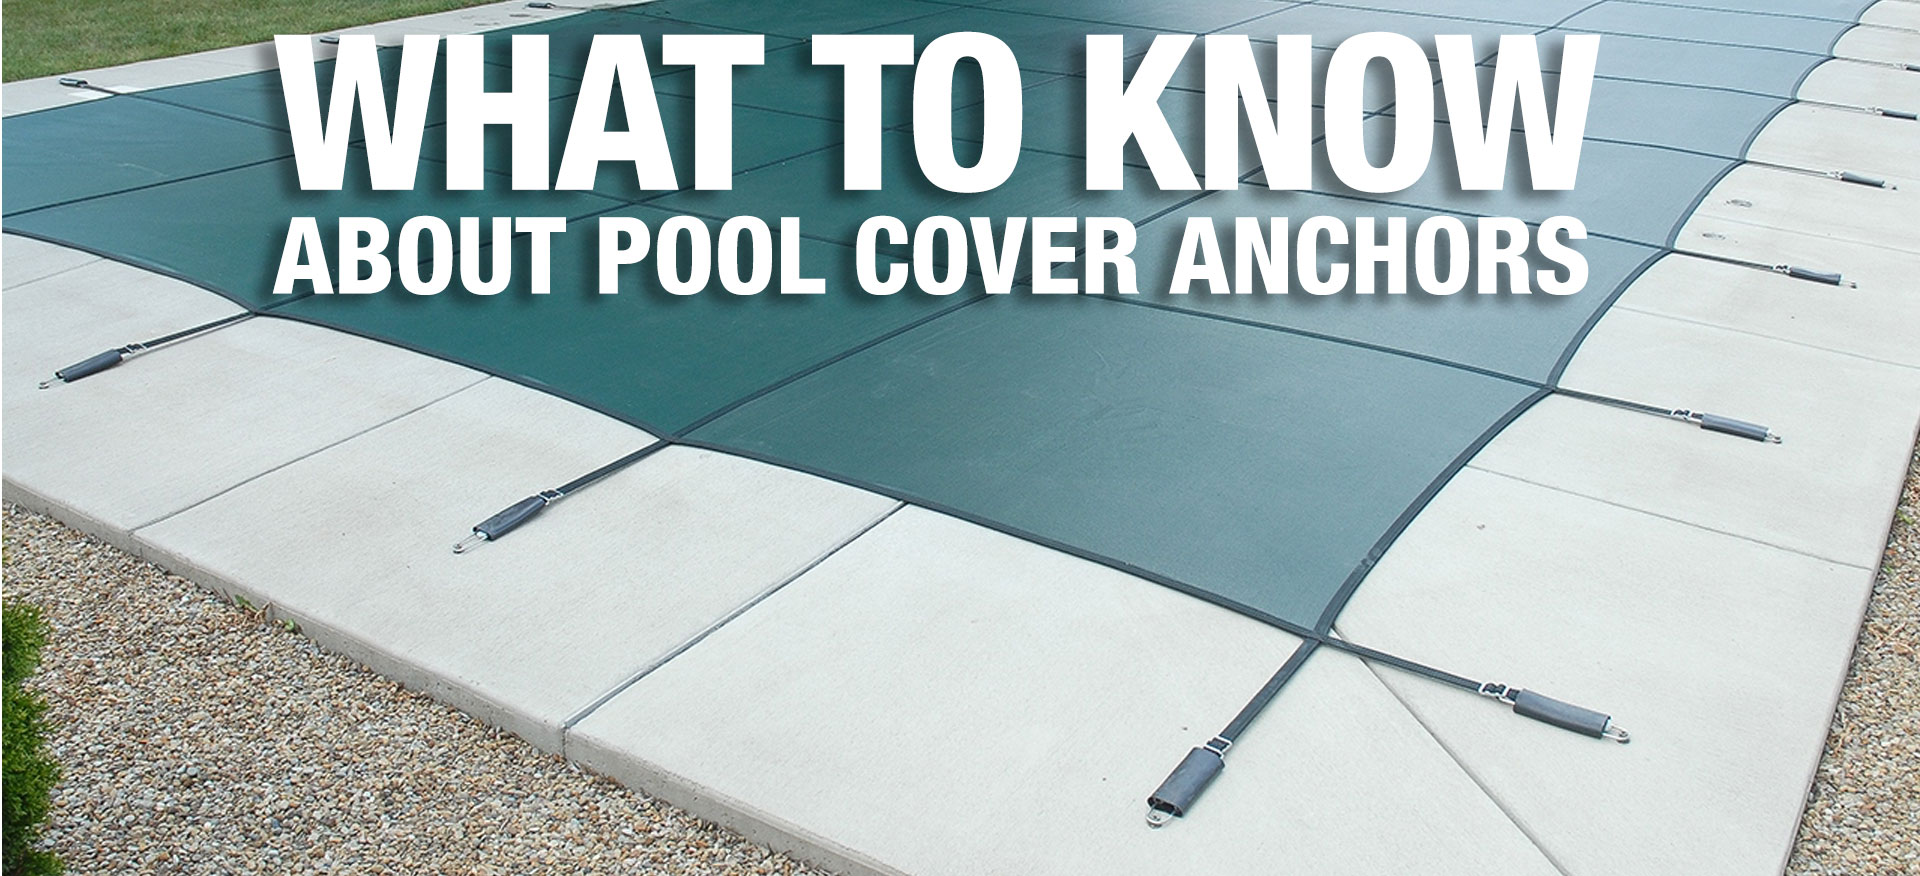 anchors for pool cover